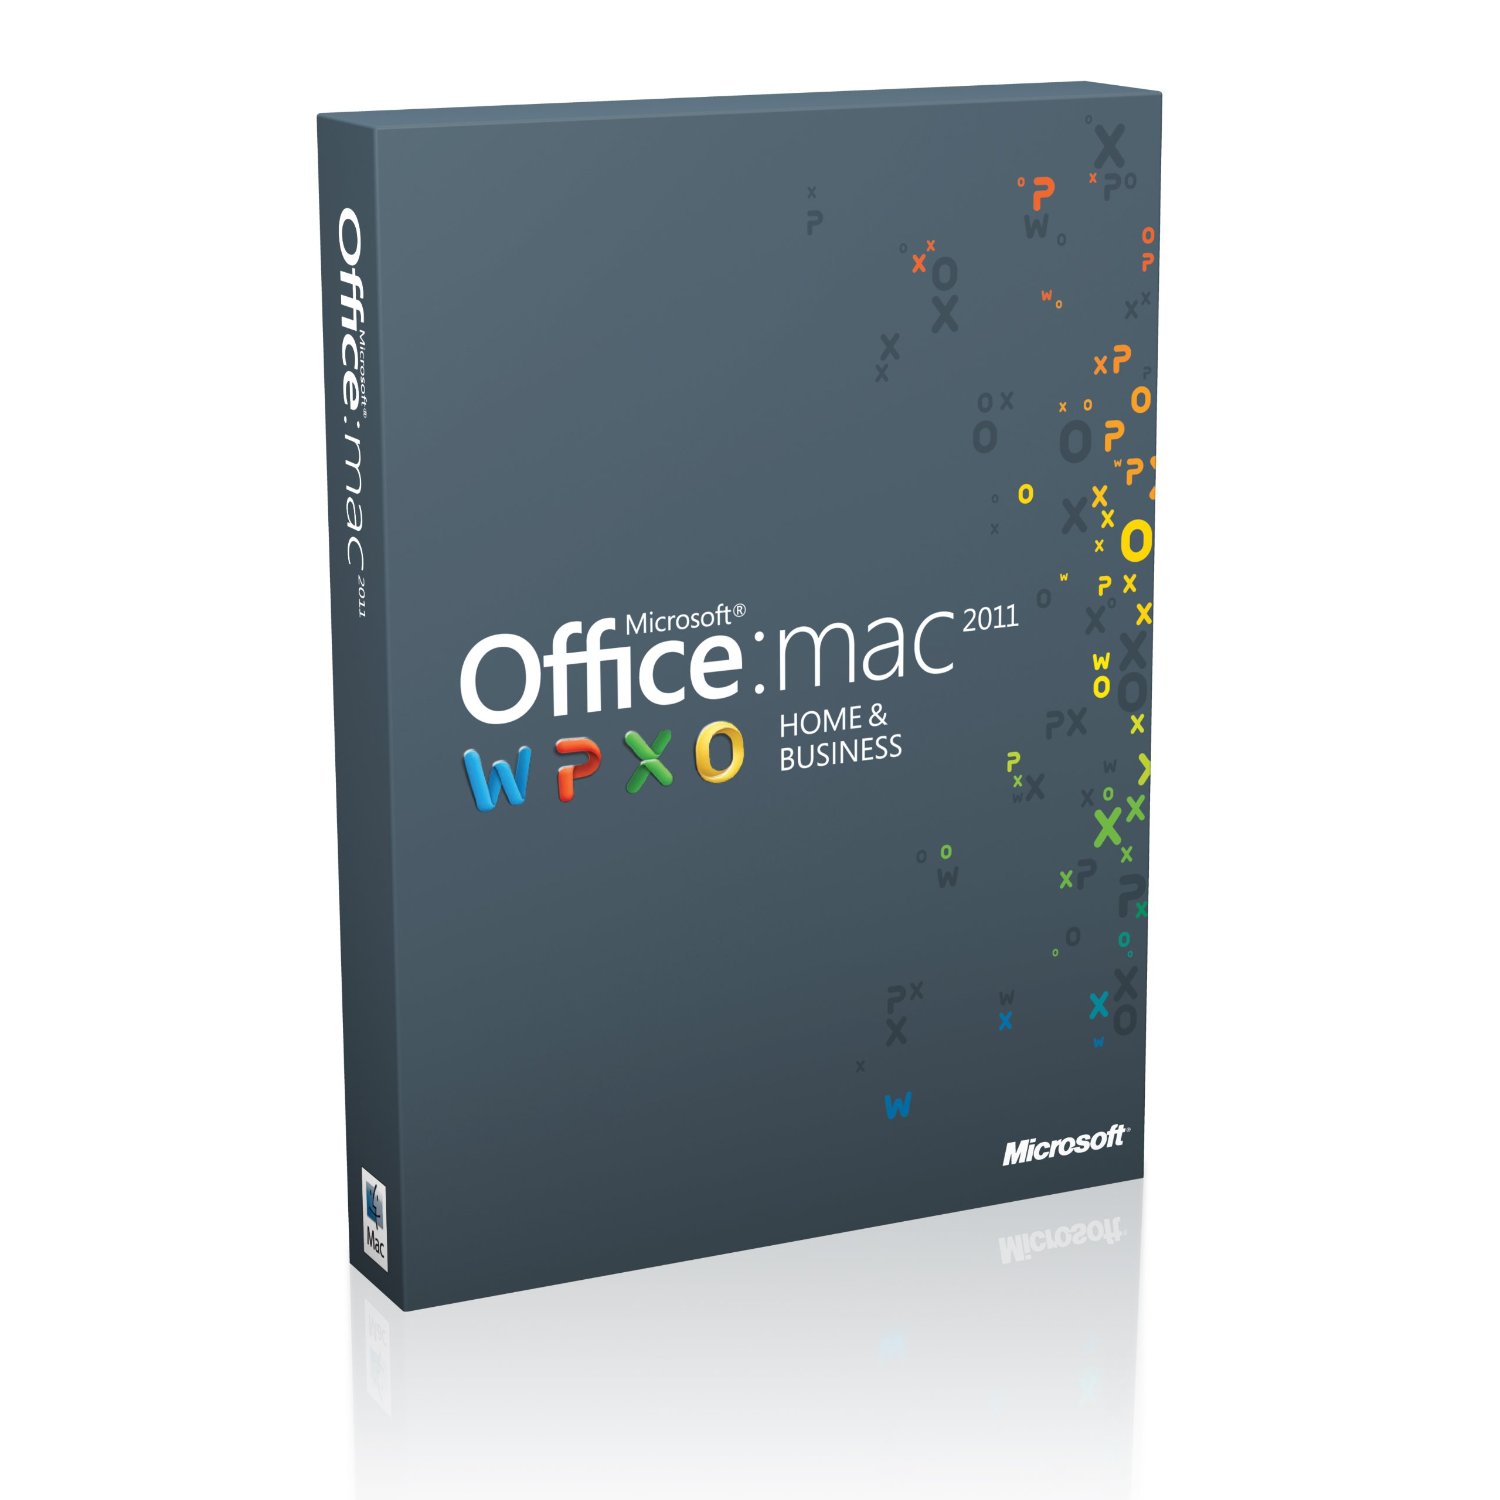 Office for mac 2011 home and business technet professional download free